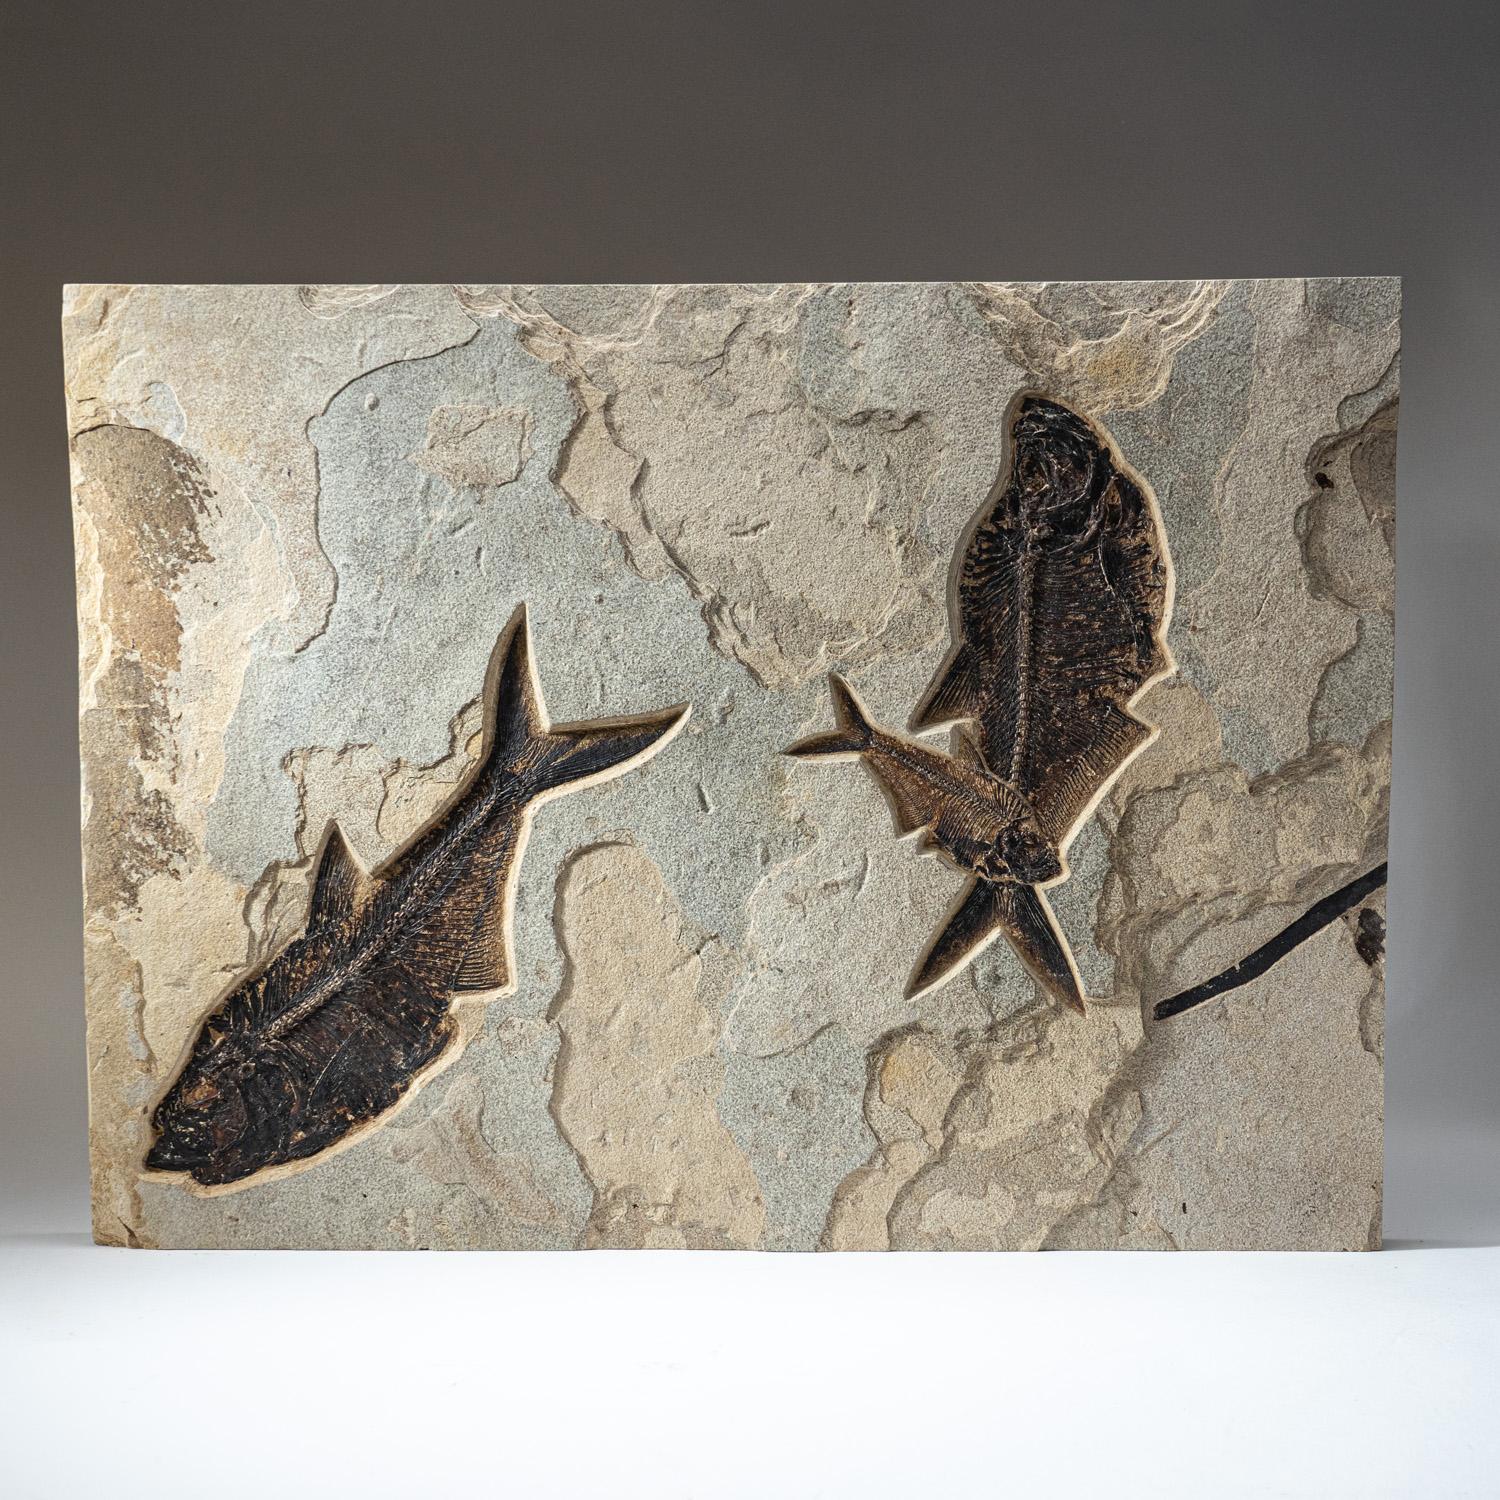 60-Pound fossil plate, with three stunning, fossilized Diplomytus fish in their natural matrix. Towards the right side of this piece, there is a beautiful overlap of two fish. This is an uncommon find. The entire piece has been backed with wood for